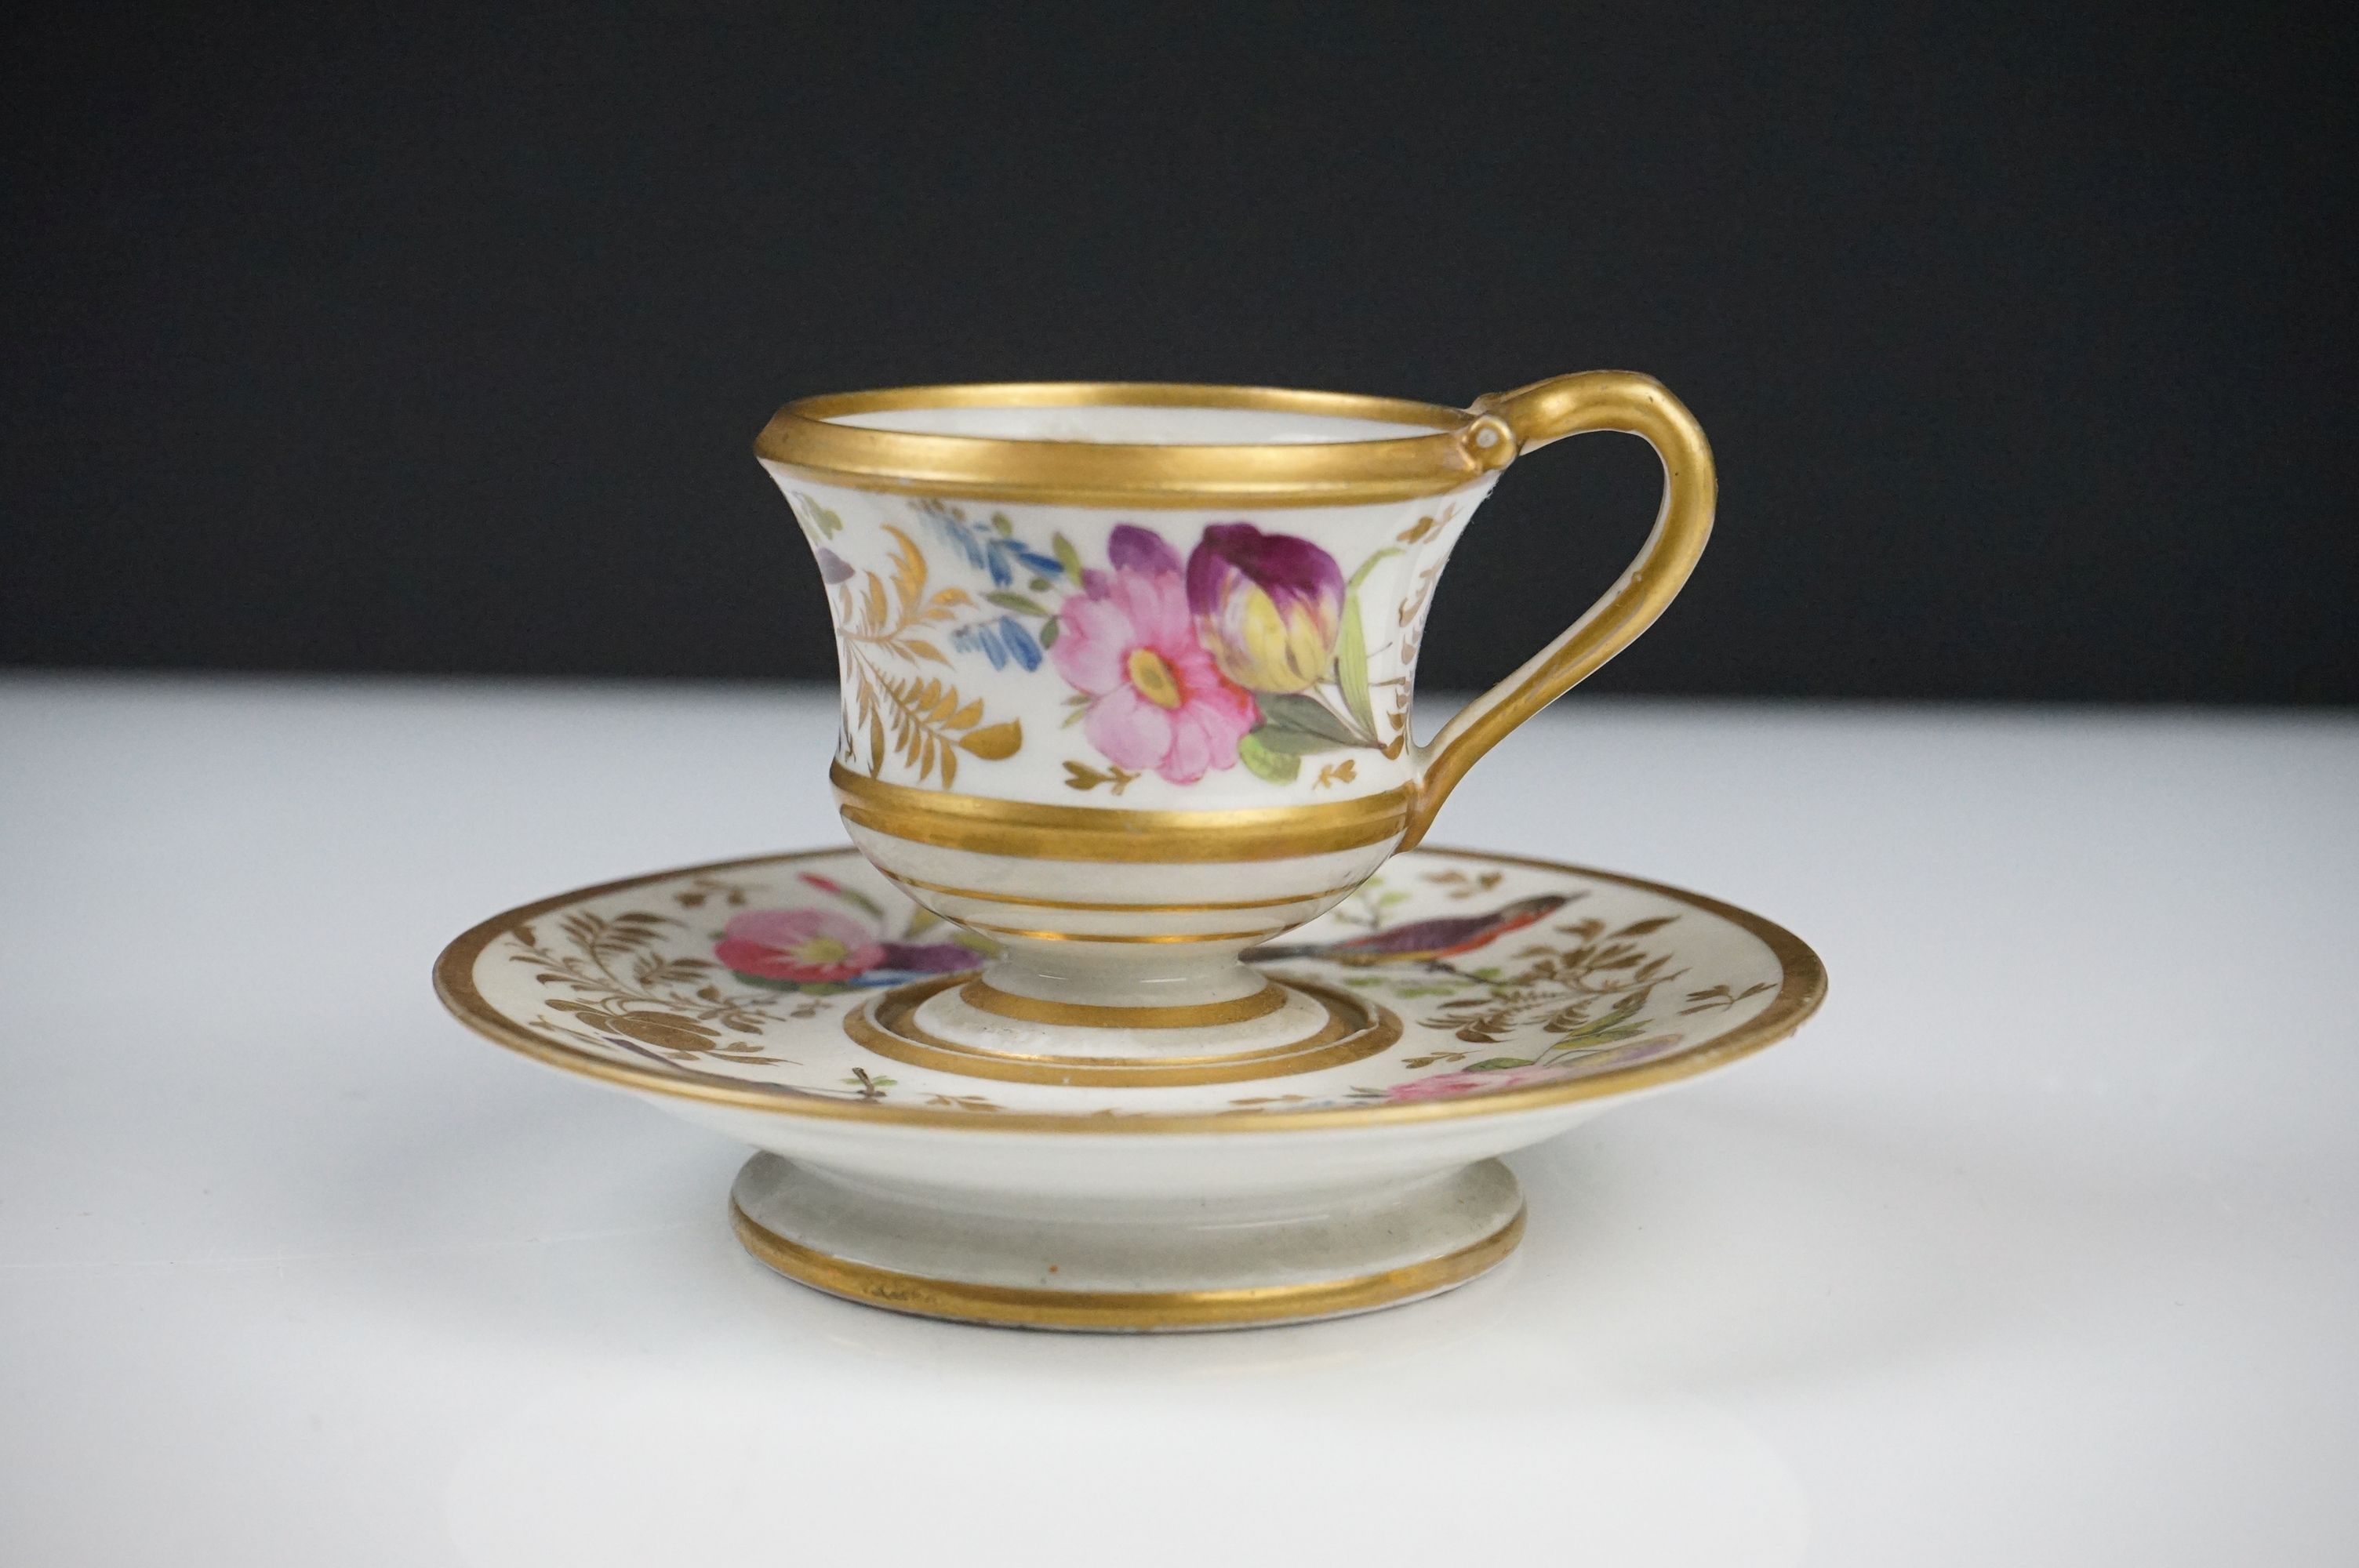 Pair of Continental Porcelain Cabinet Cups and Saucers decorated in gilt and enamels with flowers - Image 4 of 8